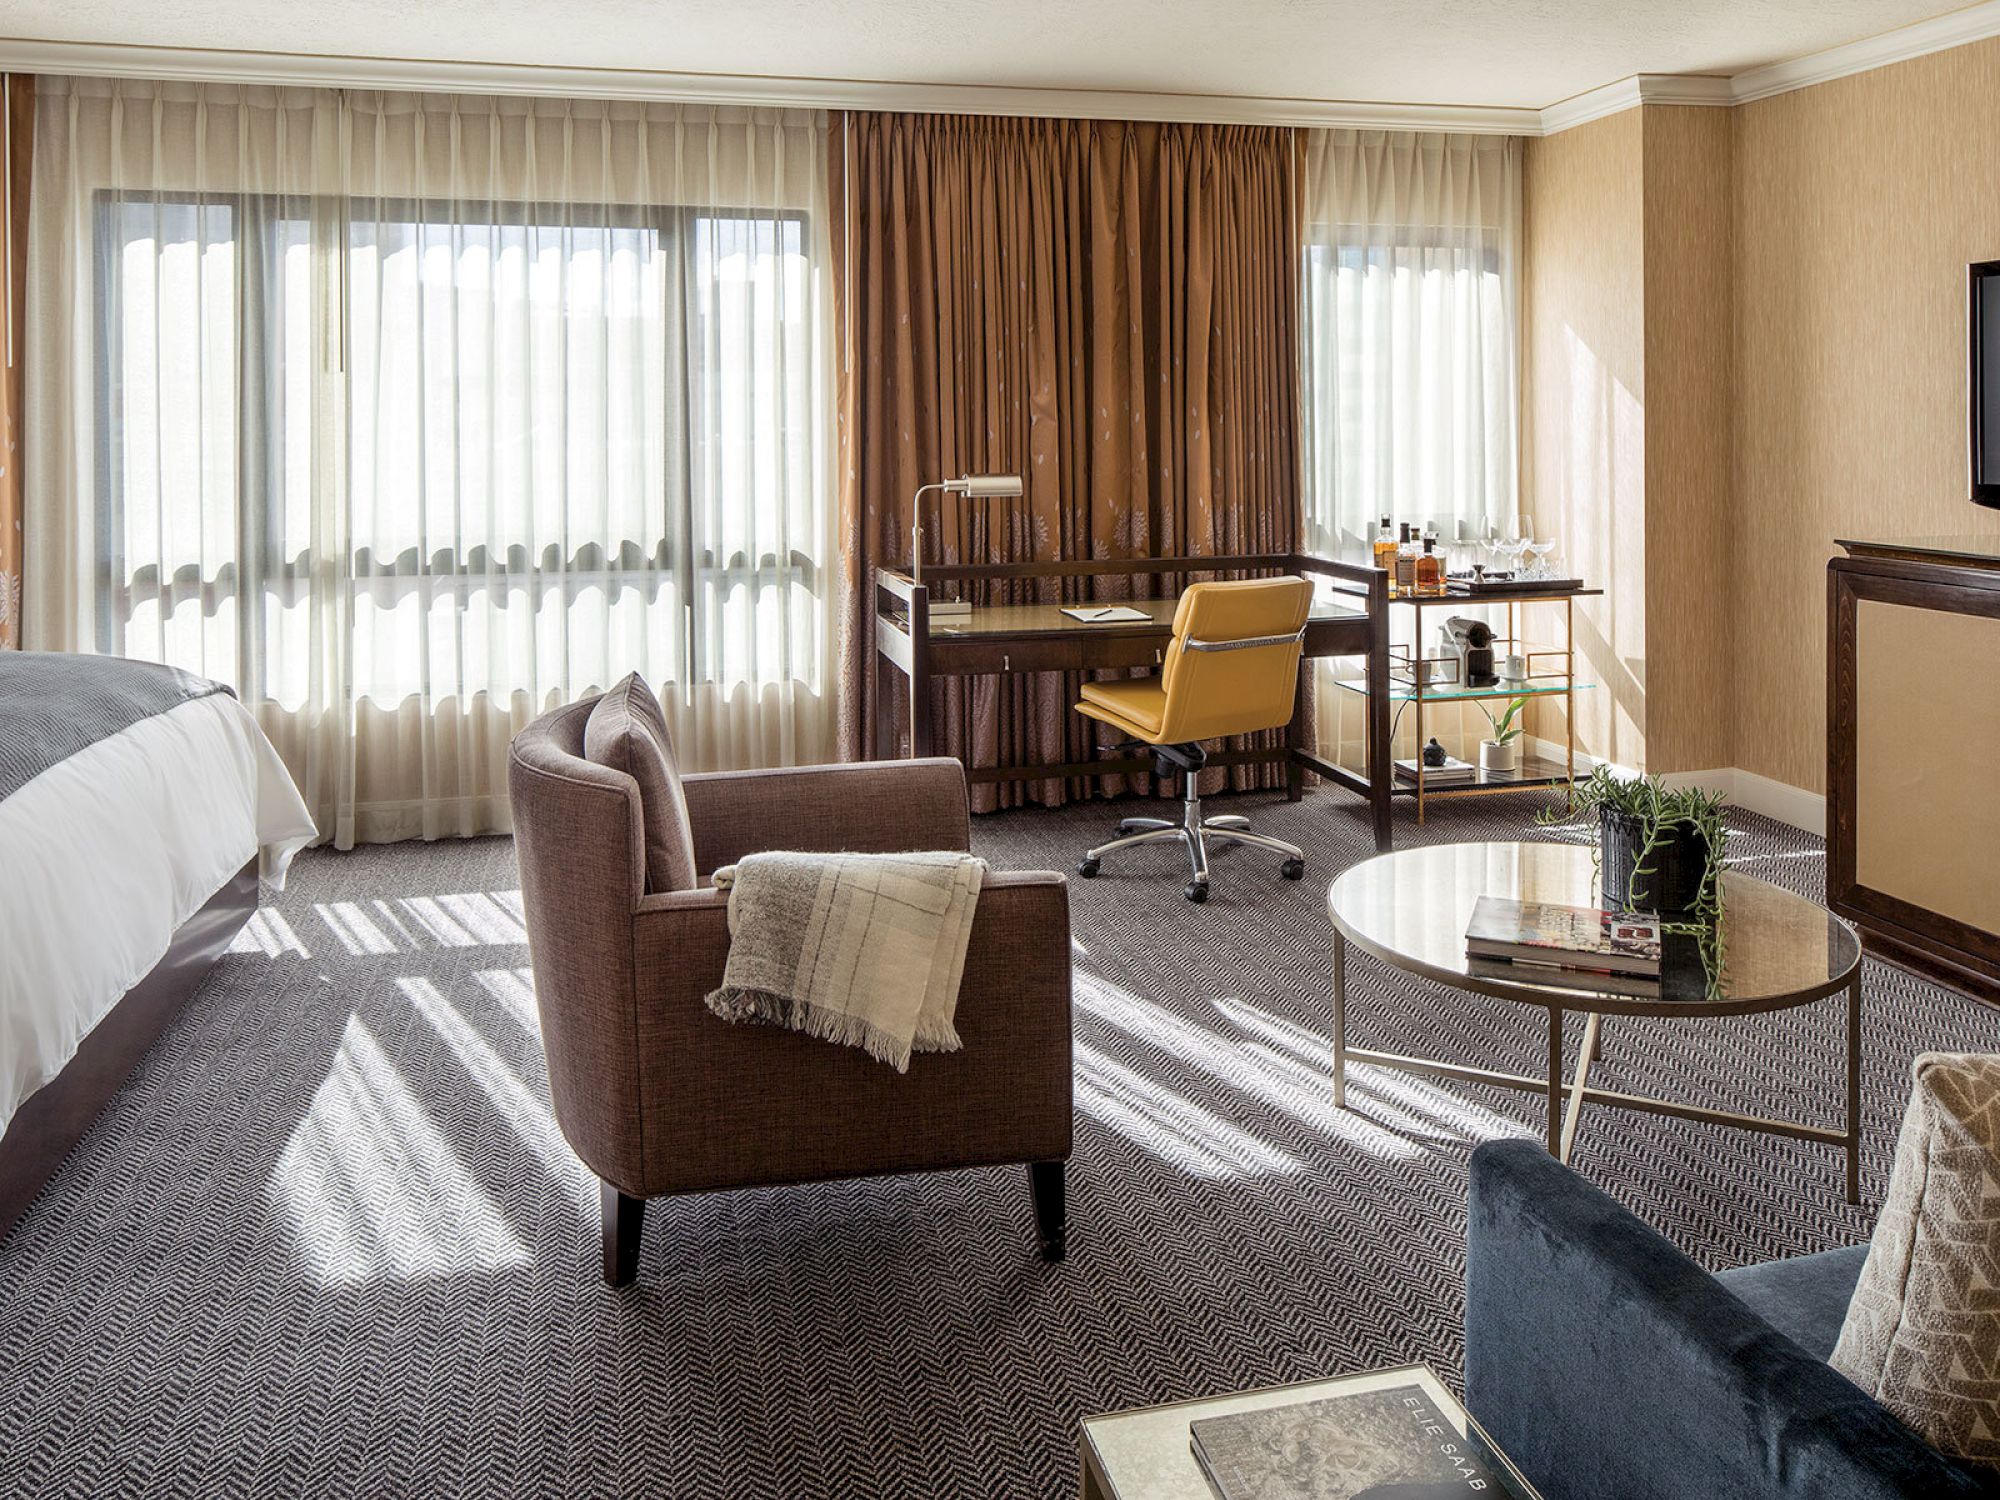 A modern hotel room with a cozy bed, armchair, desk with a yellow chair, minibar, and a coffee table, all lit by large windows with curtains.